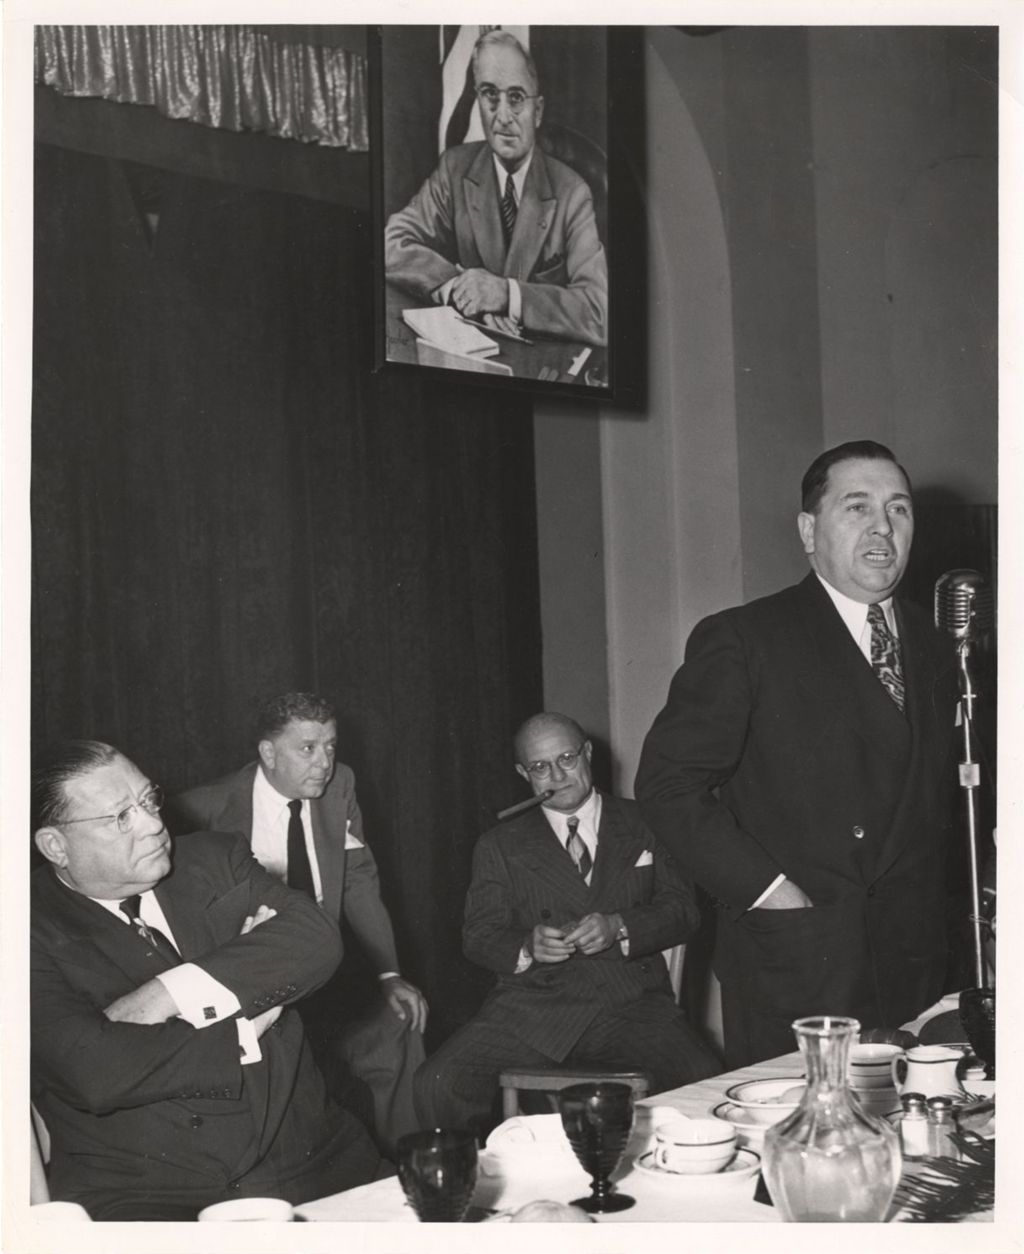 Miniature of Richard J. Daley speaking at Lucas luncheon